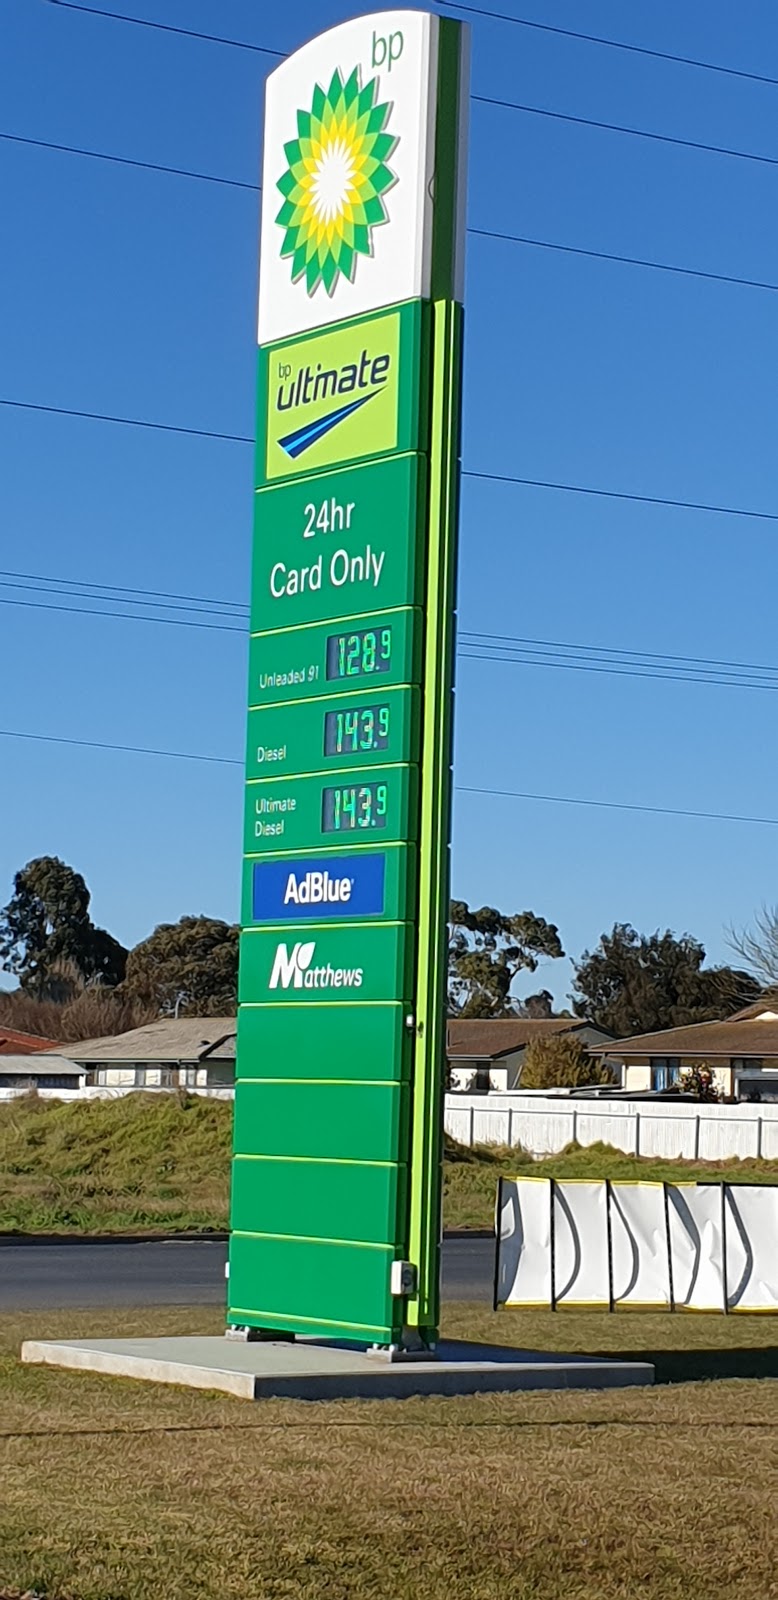 BP Truckstop | gas station | 7 OLeary Rd, Suttontown SA 5291, Australia | 0459070843 OR +61 459 070 843